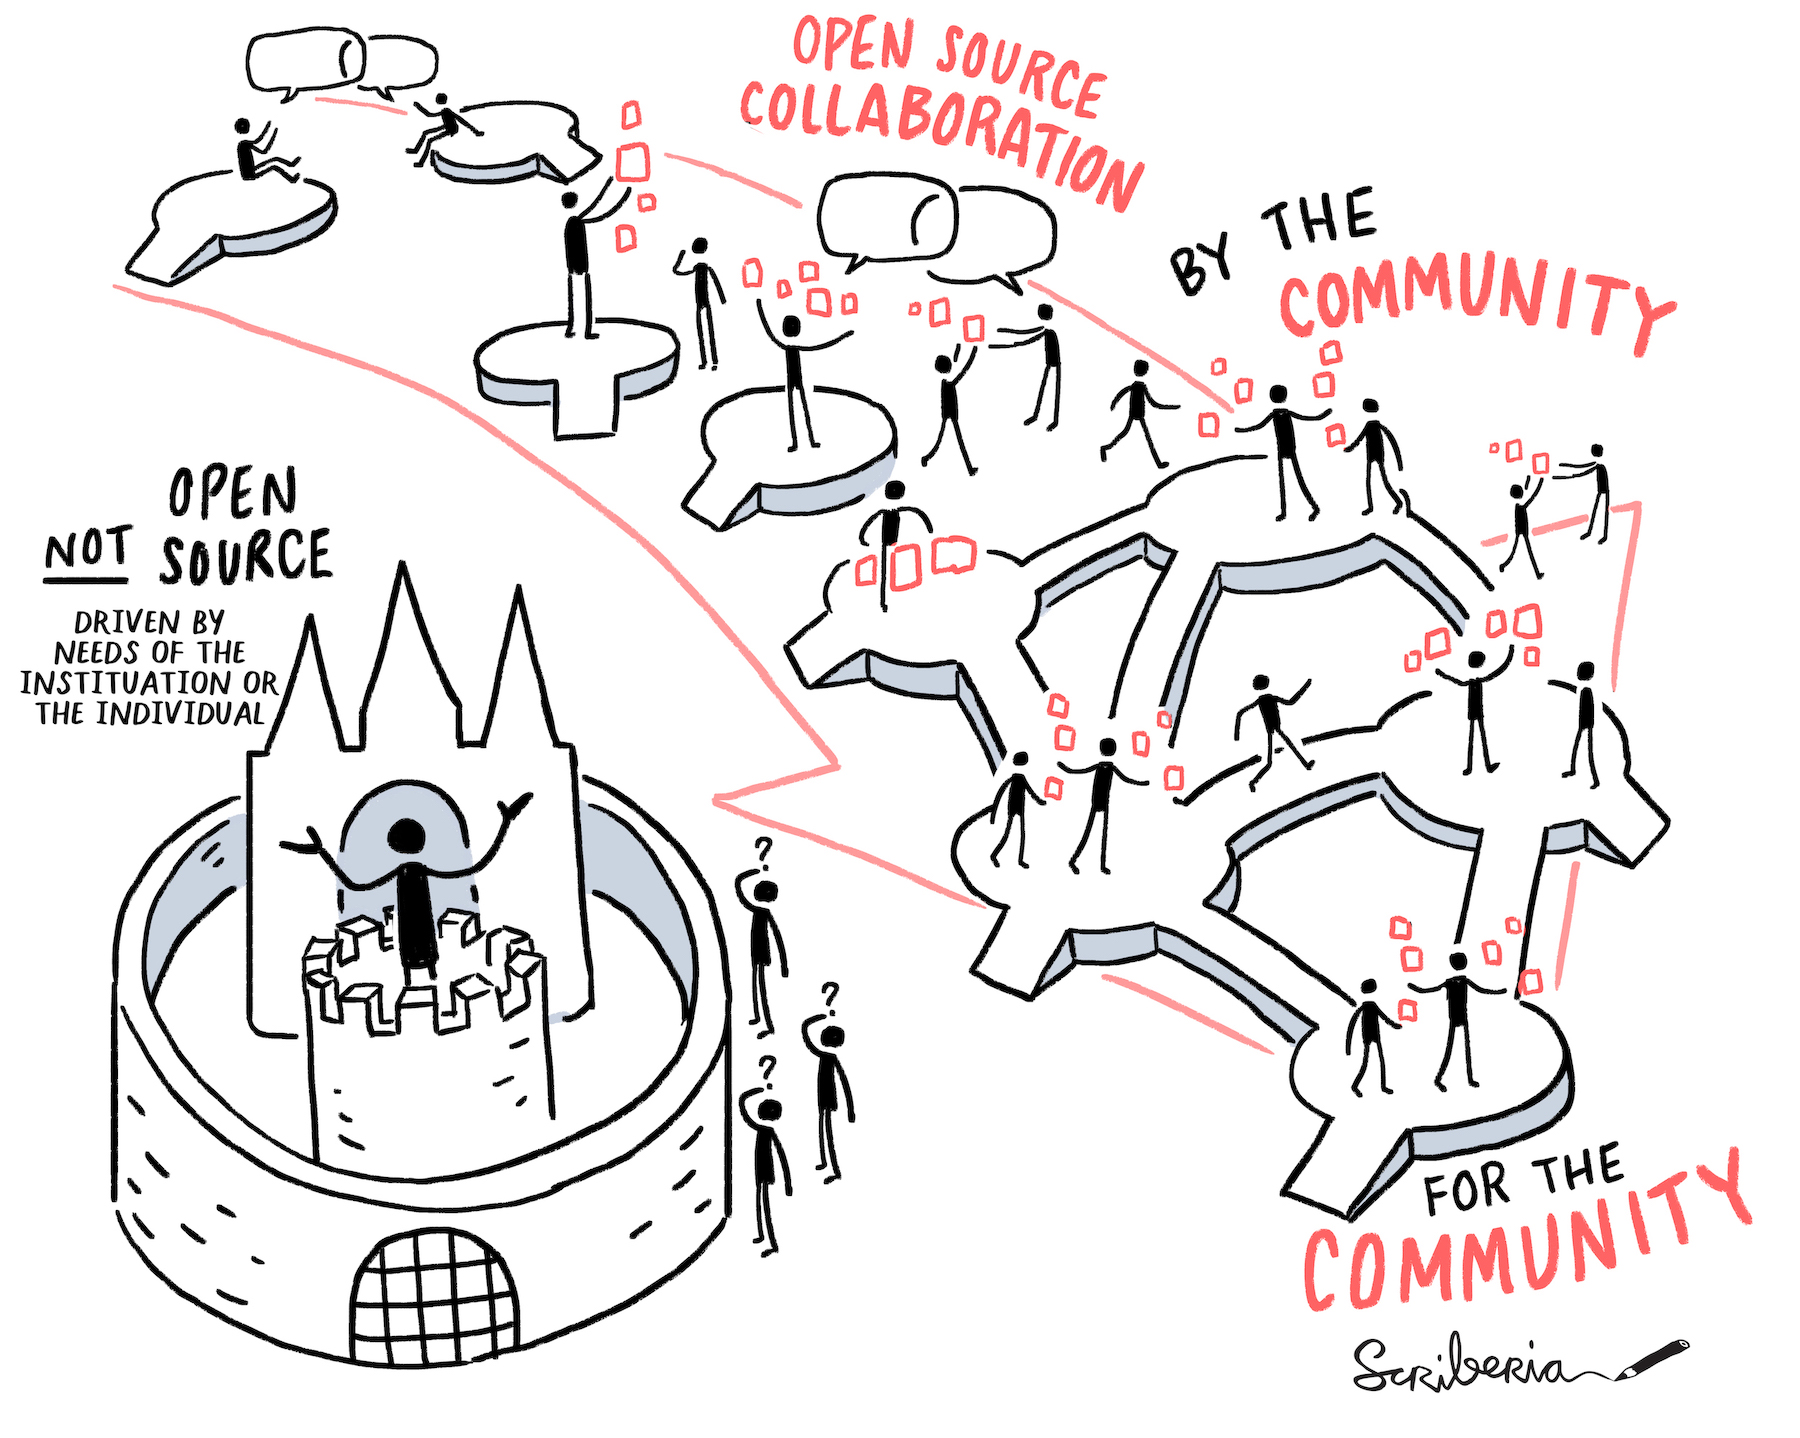 This illustration shows that closed source projects are driven by the needs of the institution or the individuals whereas the open source community allows different people to interact, exchange ideas, collaborate and build resources using “by the community - for the community” principles